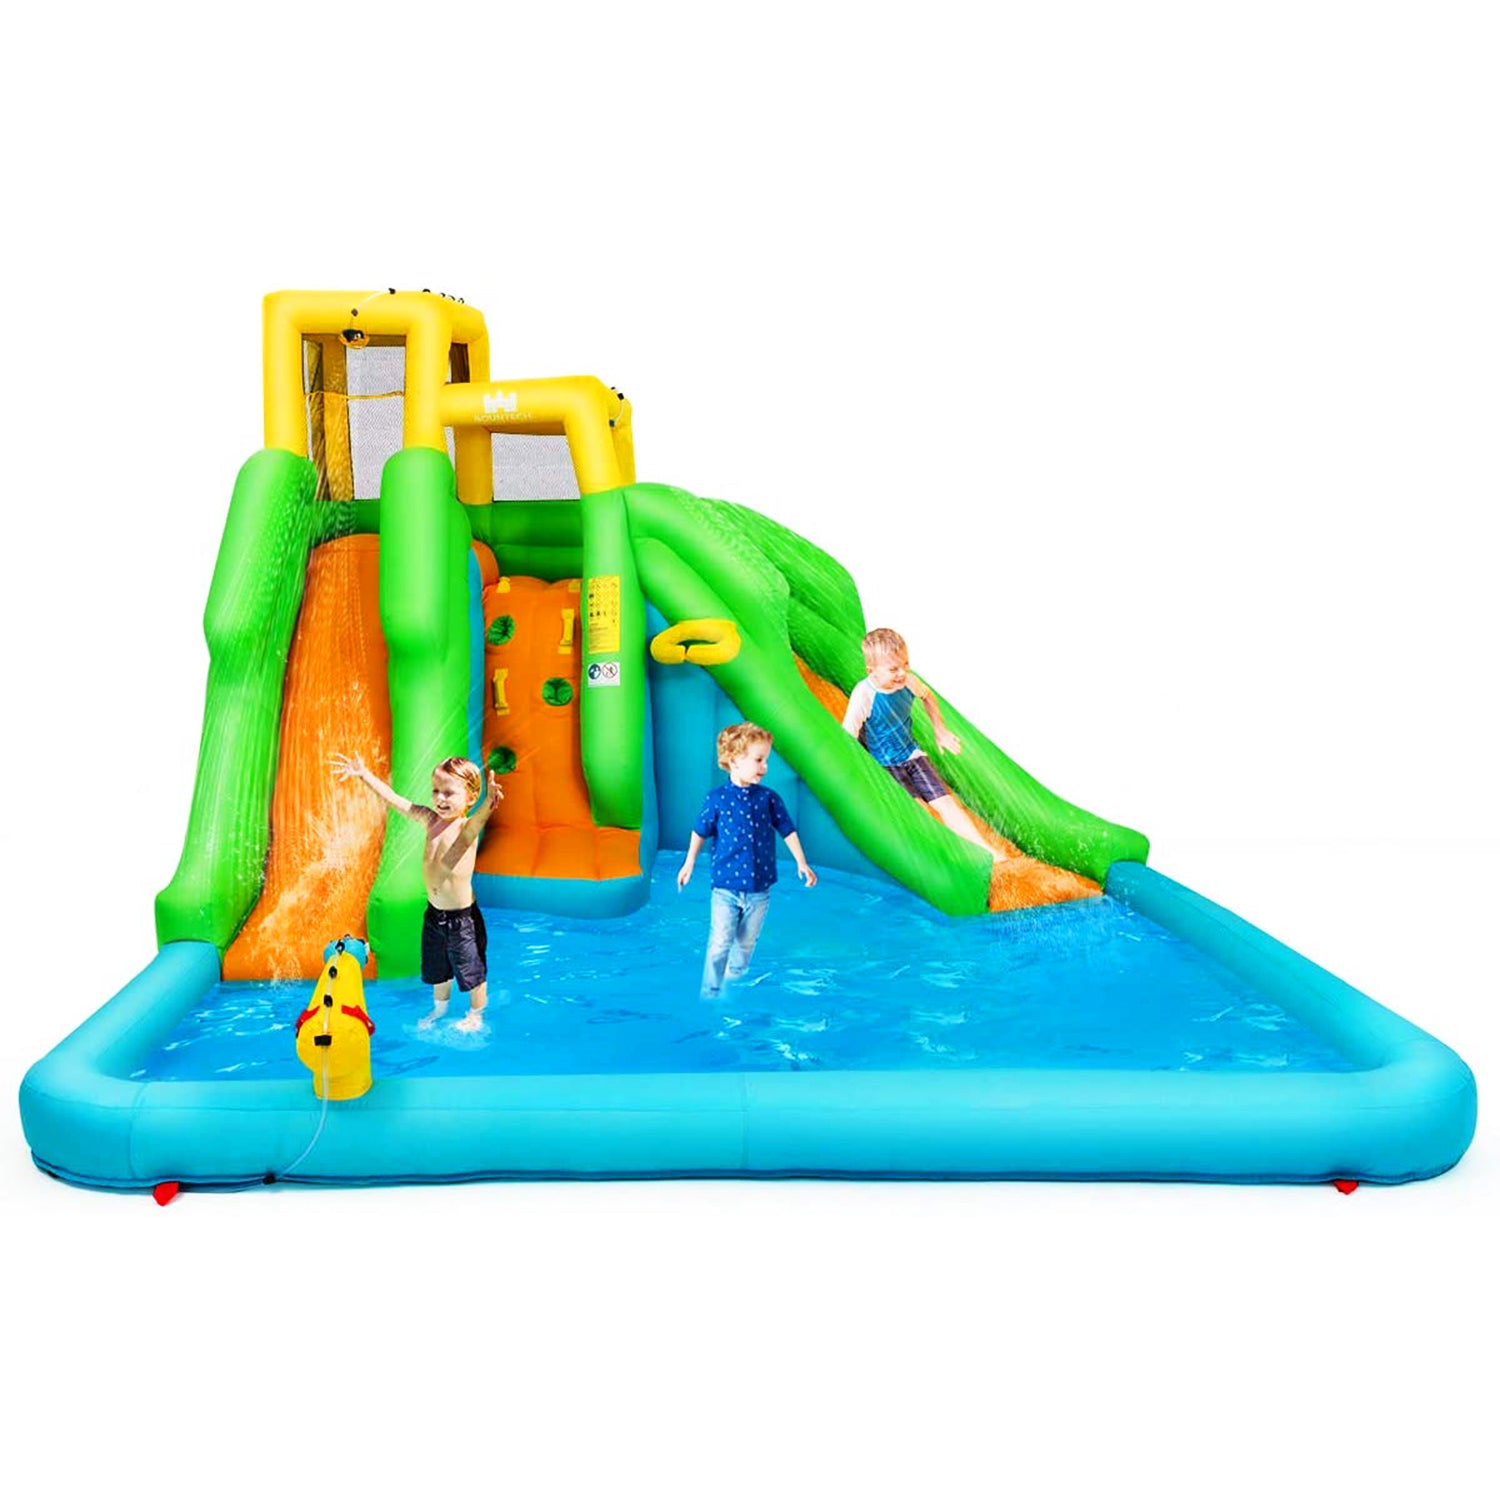 Inflatable Sprinkler Pool for Kids 3 in 1 Baby Pool Outdoor Splash Pad for  Toddlers Fun Water Toys for Babies Children Boys Girls Backyard